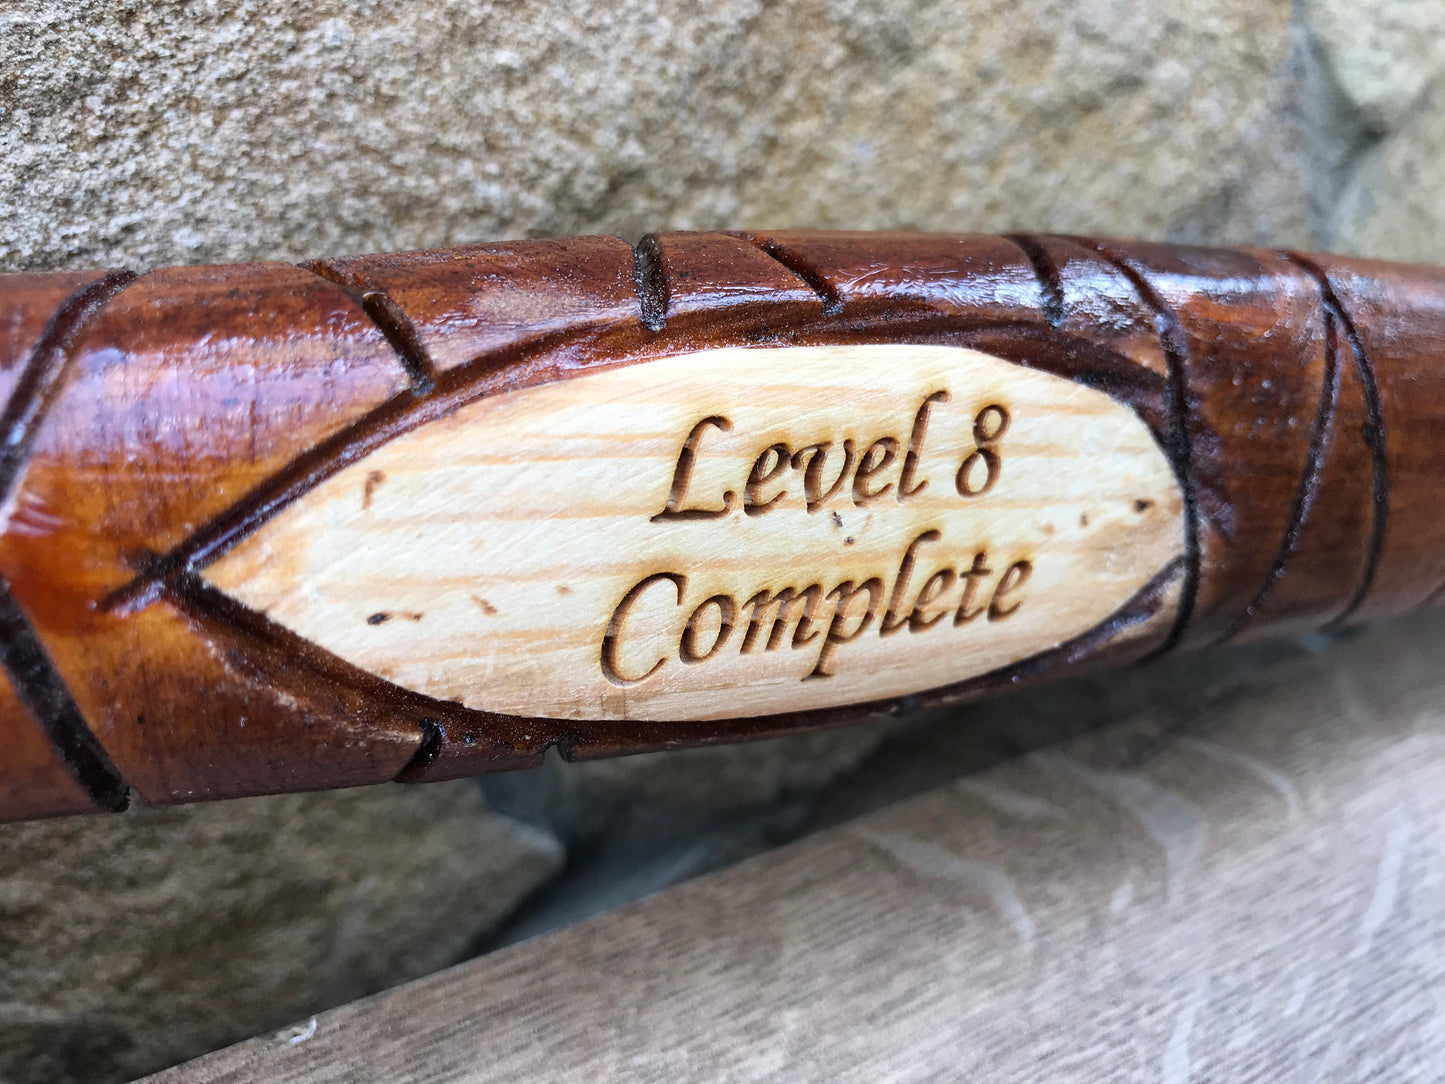 Copper hammer, 7th anniversary gift for him, copper gift for him, 7th anniversary, copper gifts for him,copper gifts,copper anniversary gift